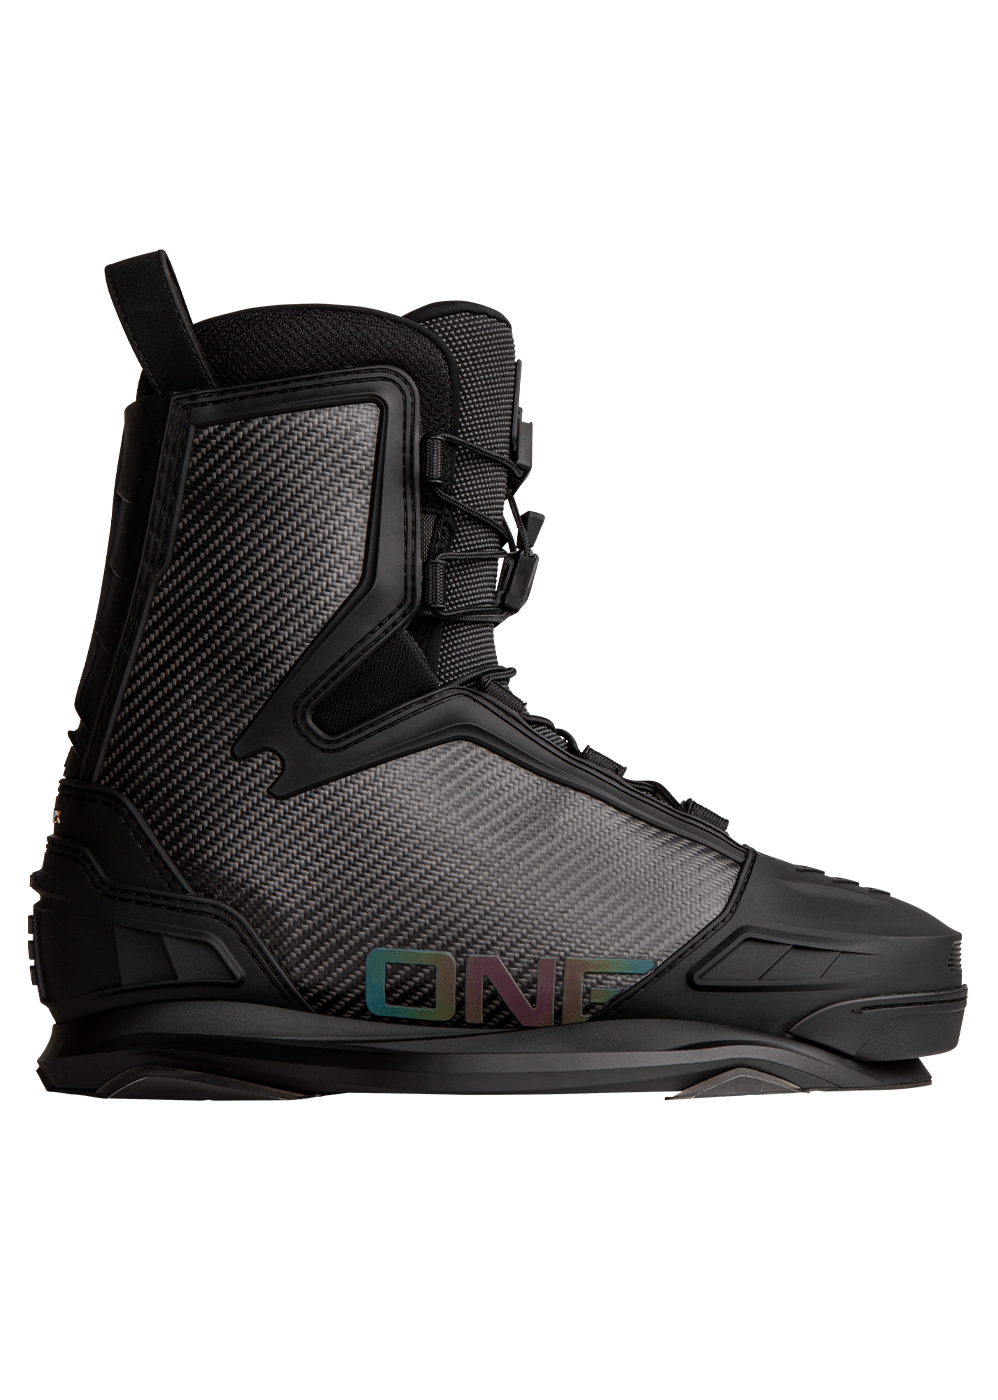 Ronix Boots | One Boots | Carbitex - Intuition+ | Ronix Wakeboards